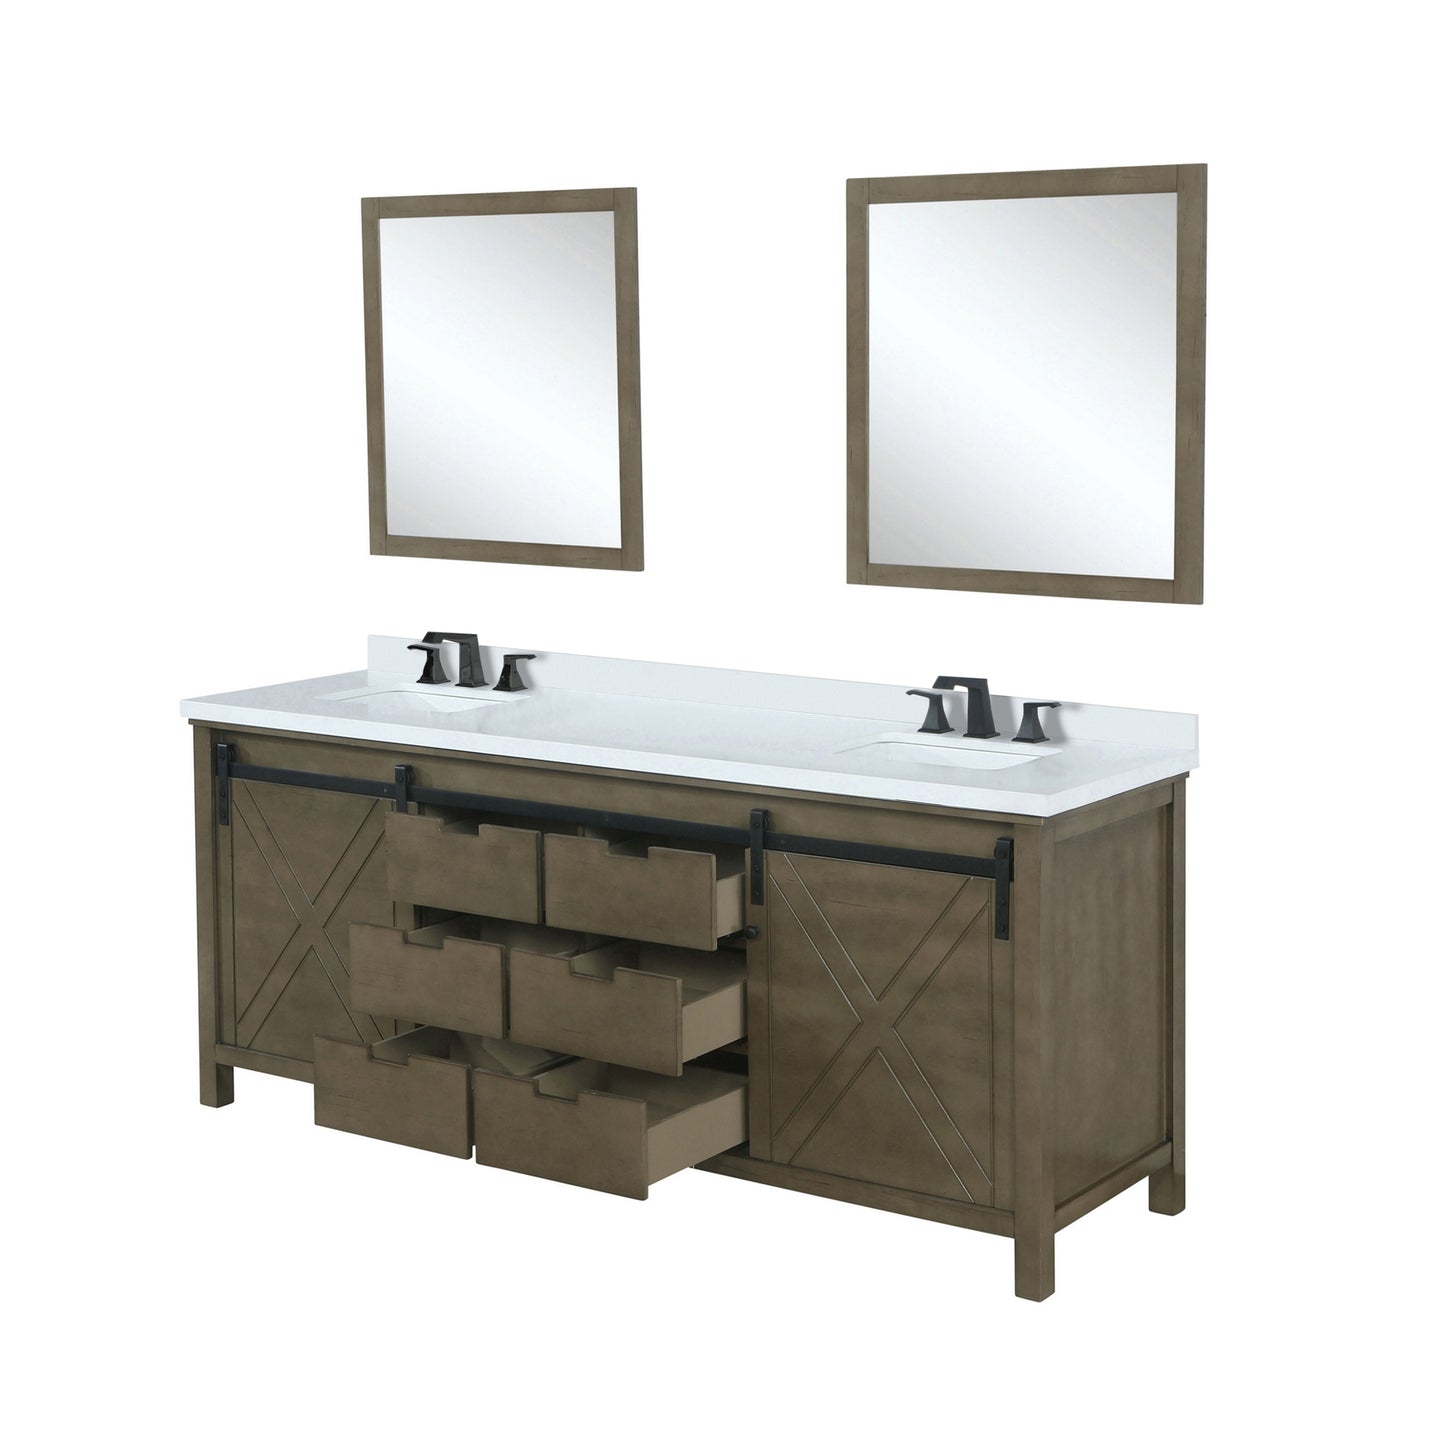 Lexora Collection Marsyas 84 inch Double Bath Vanity, Cultured Marble Countertop, Faucet Set and 34 inch Mirrors - Luxe Bathroom Vanities